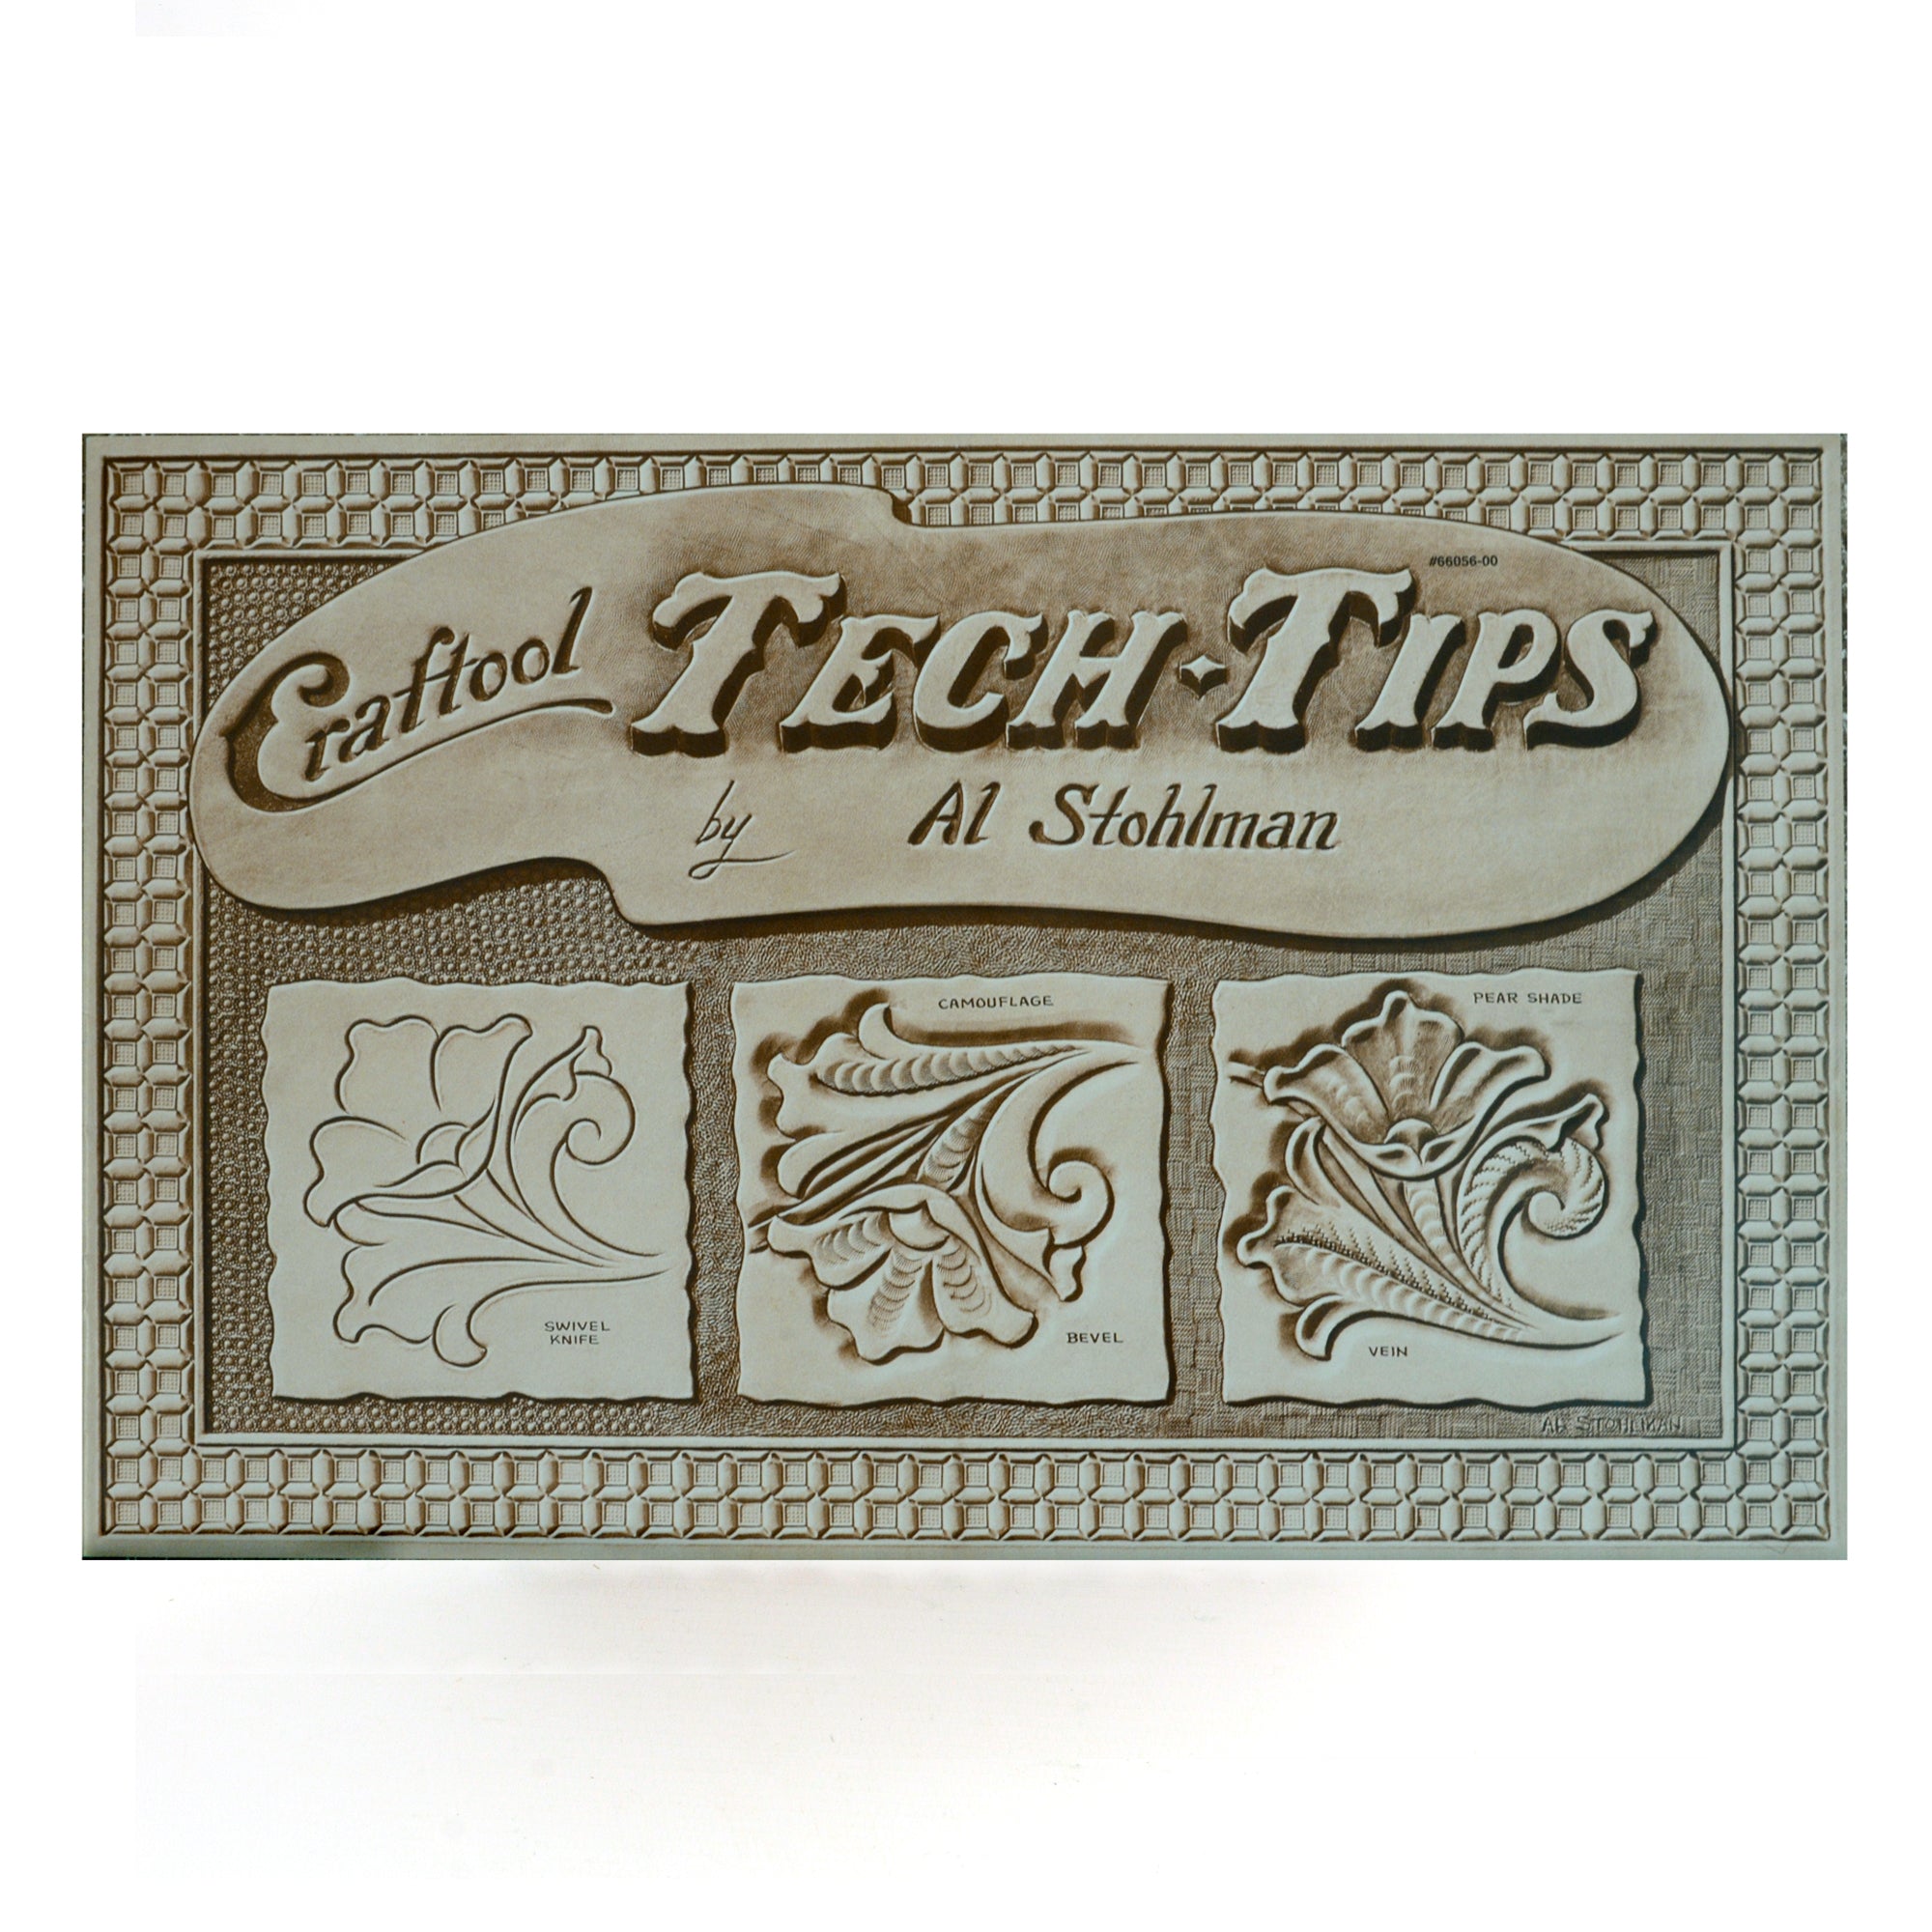 Craftool Tech Tips by Al Stohlman from Identity Leathercraft